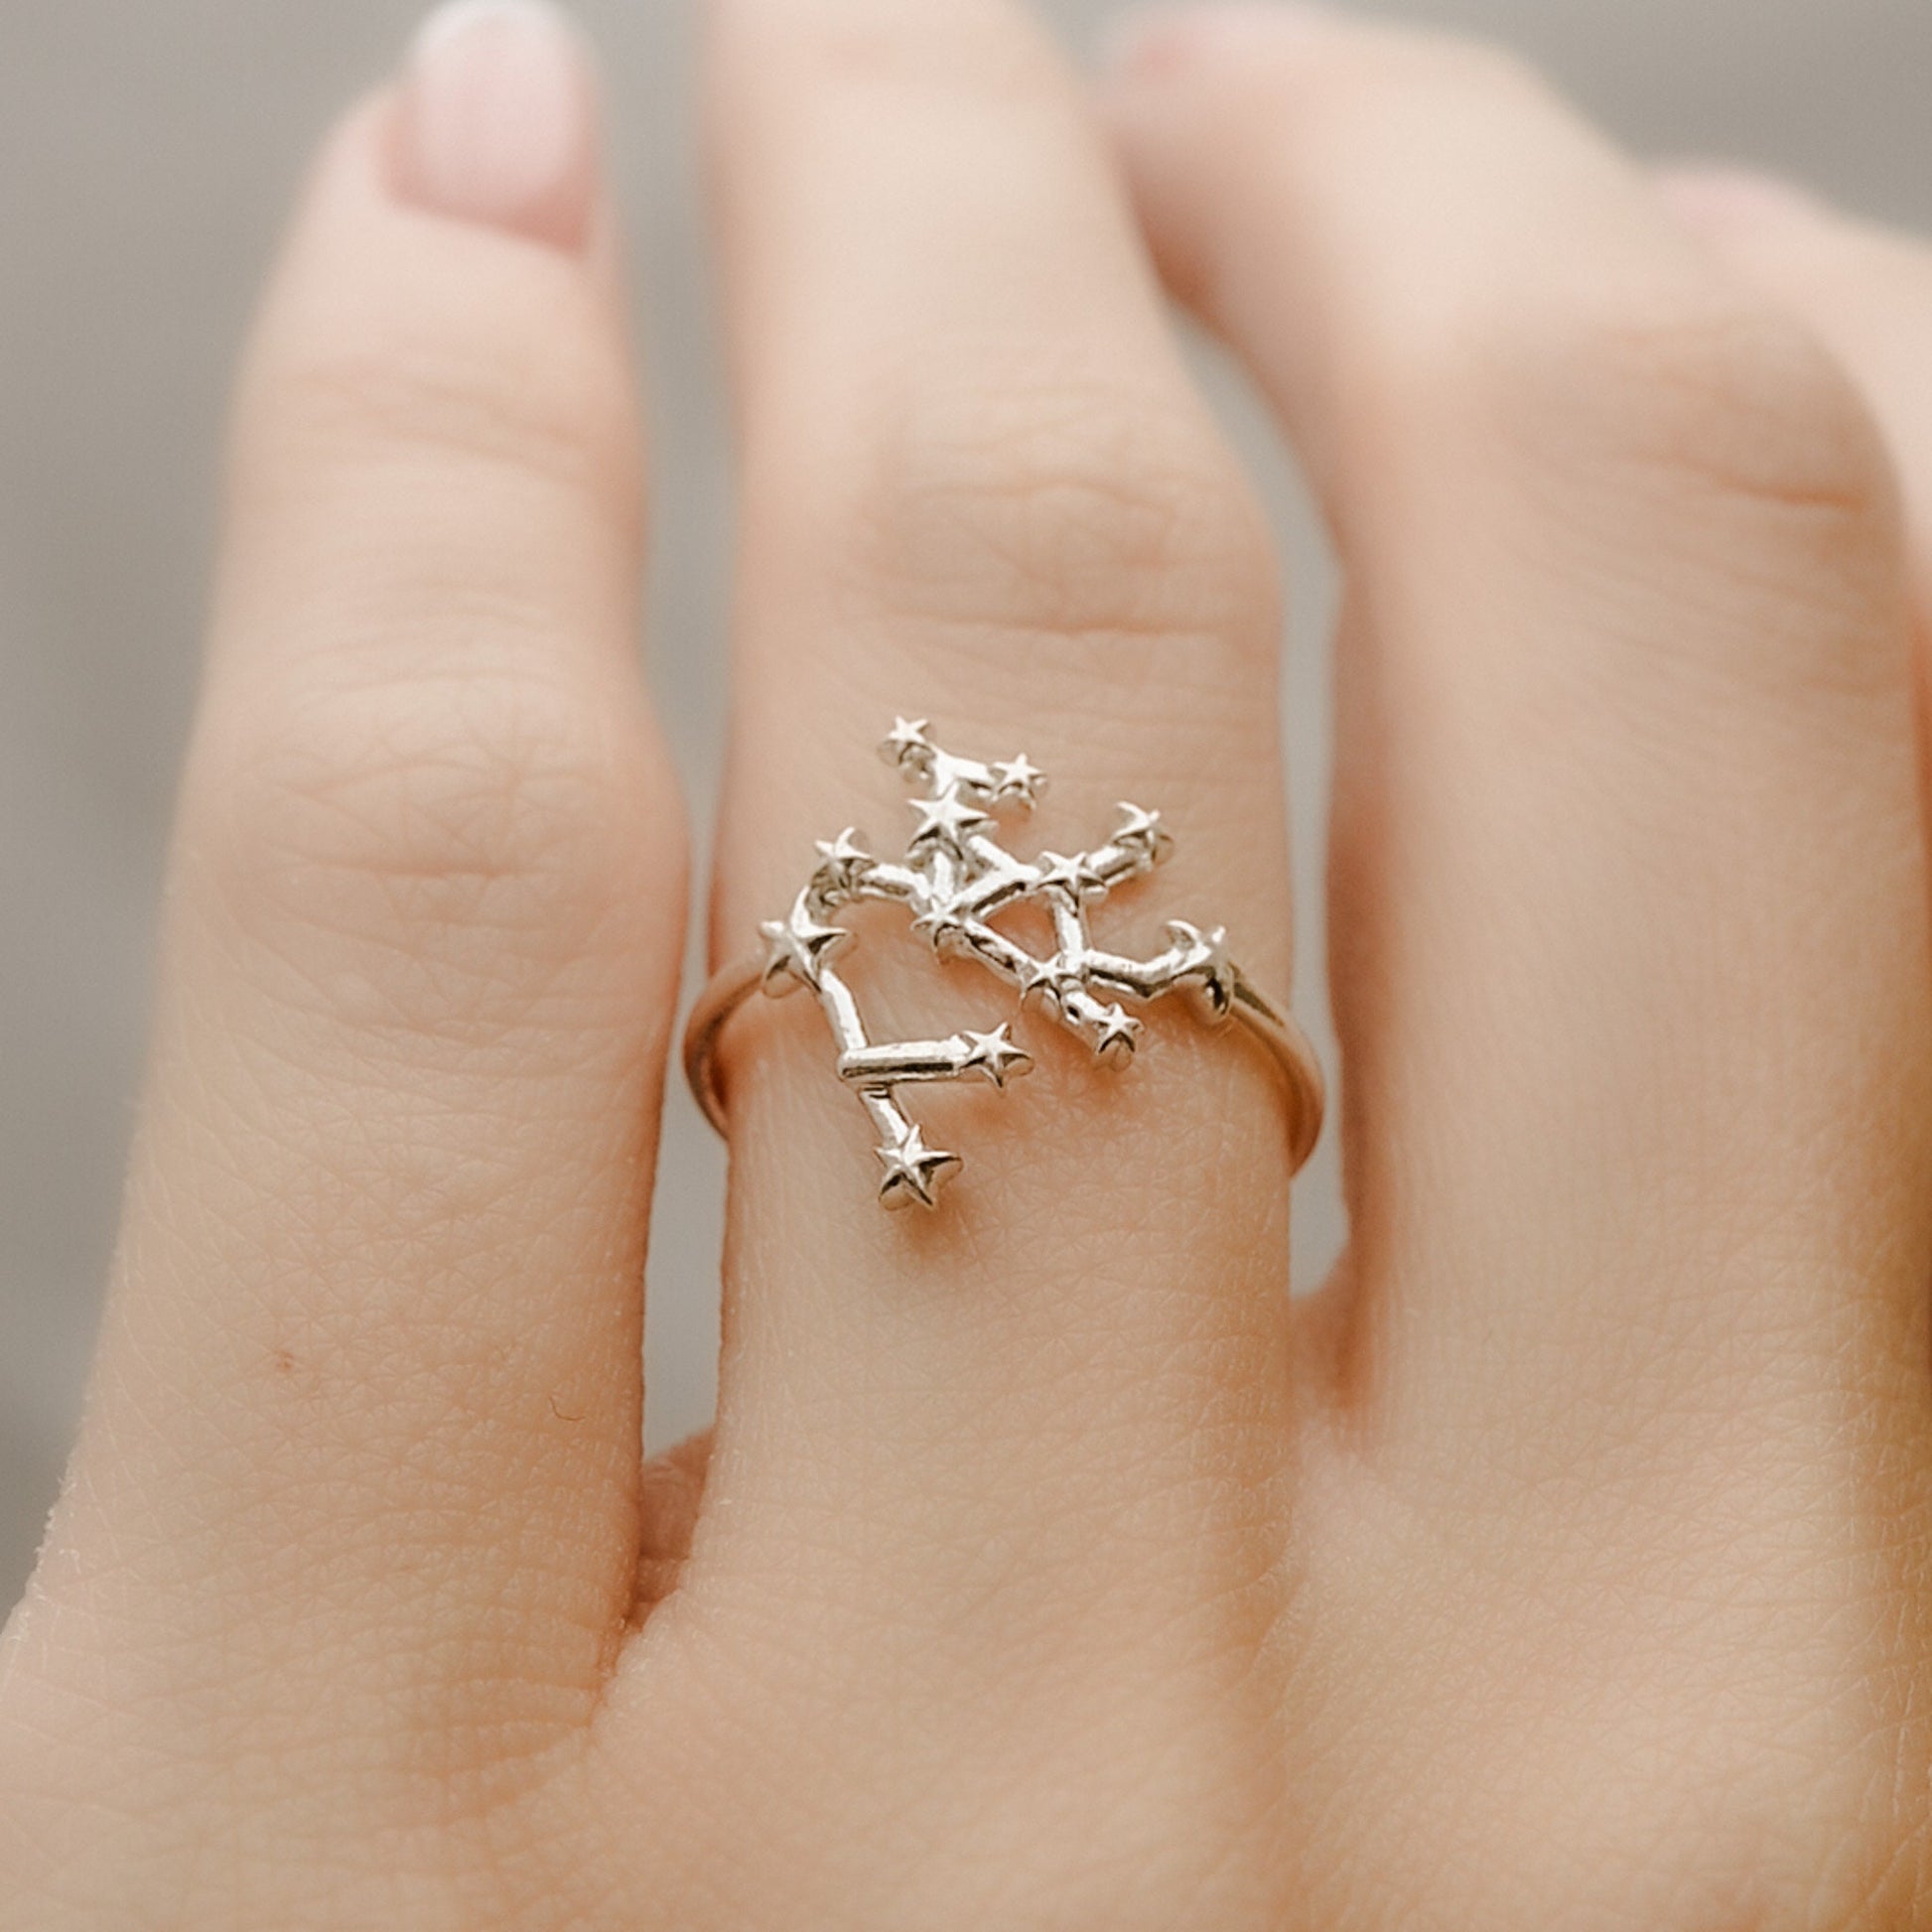 Solid Gold Sagittarius Star Sign Dainty Celestial Zodiac Ring in solid 14K Yellow Gold, 14k White Gold, 14K Rose Gold